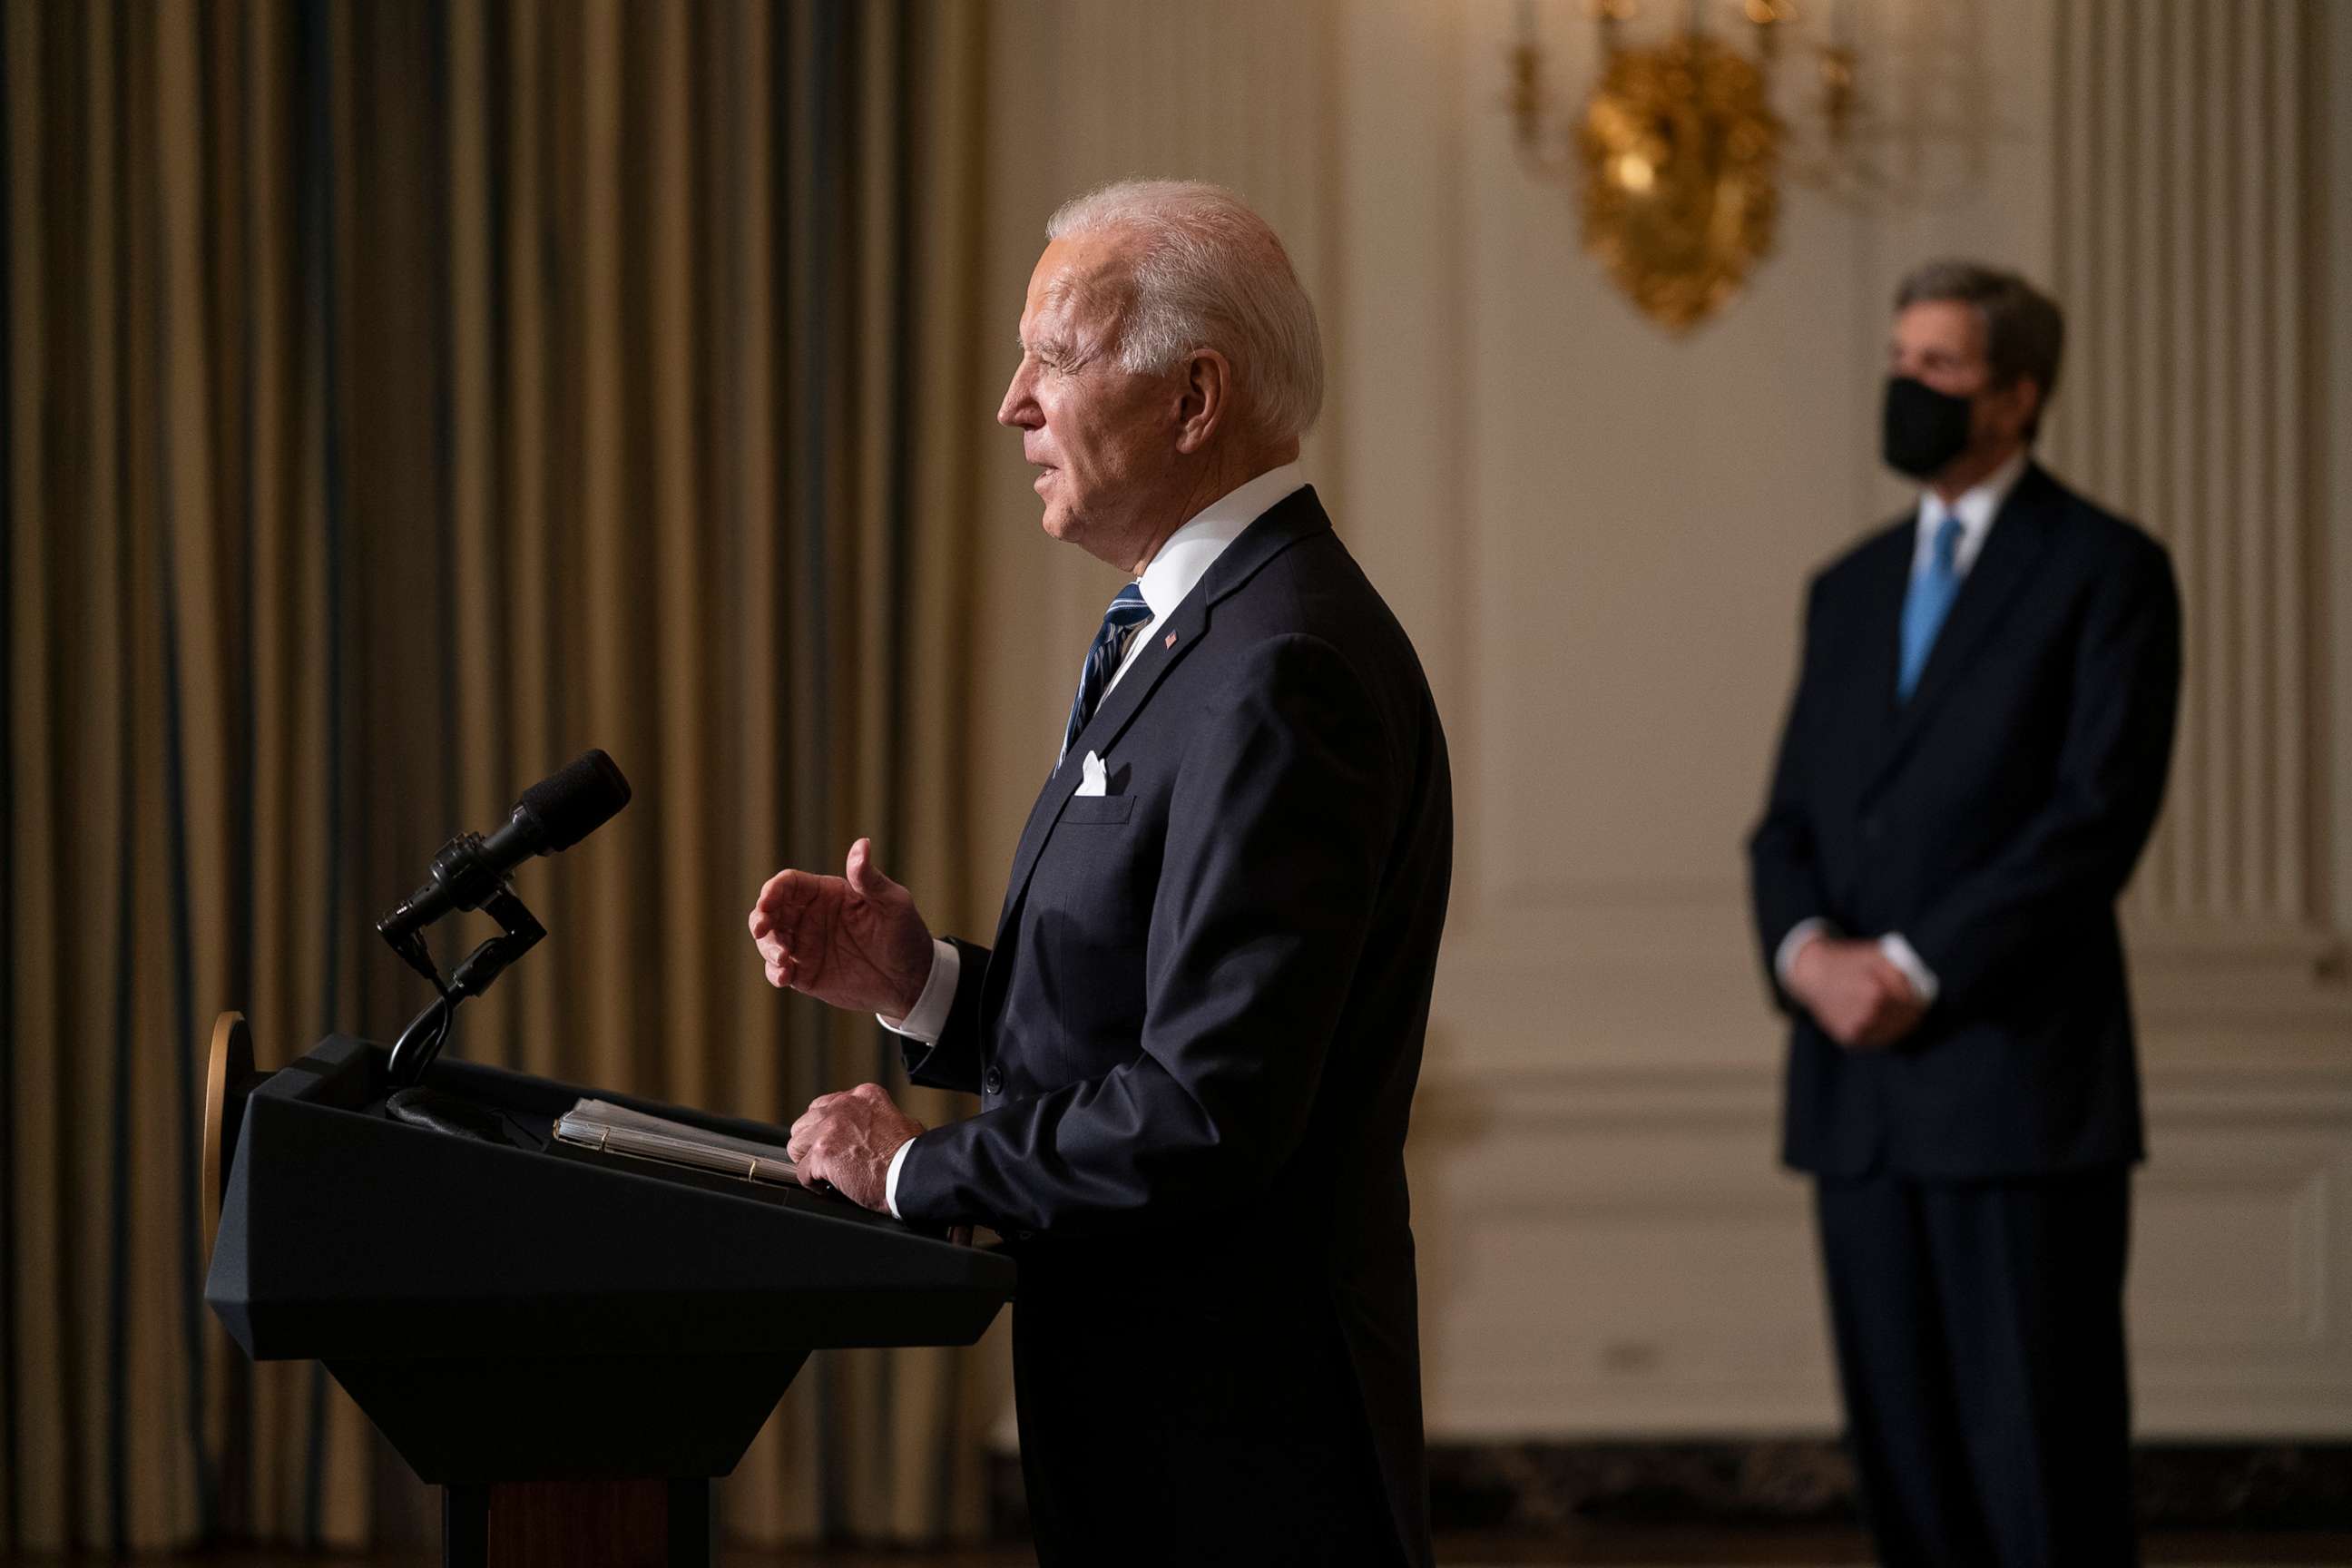 PHOTO: Special Presidential Envoy for Climate John Kerry, right, listens as President Joe Biden delivers remarks on climate change and green jobs, in the State Dining Room of the White House, Jan. 27, 2021.